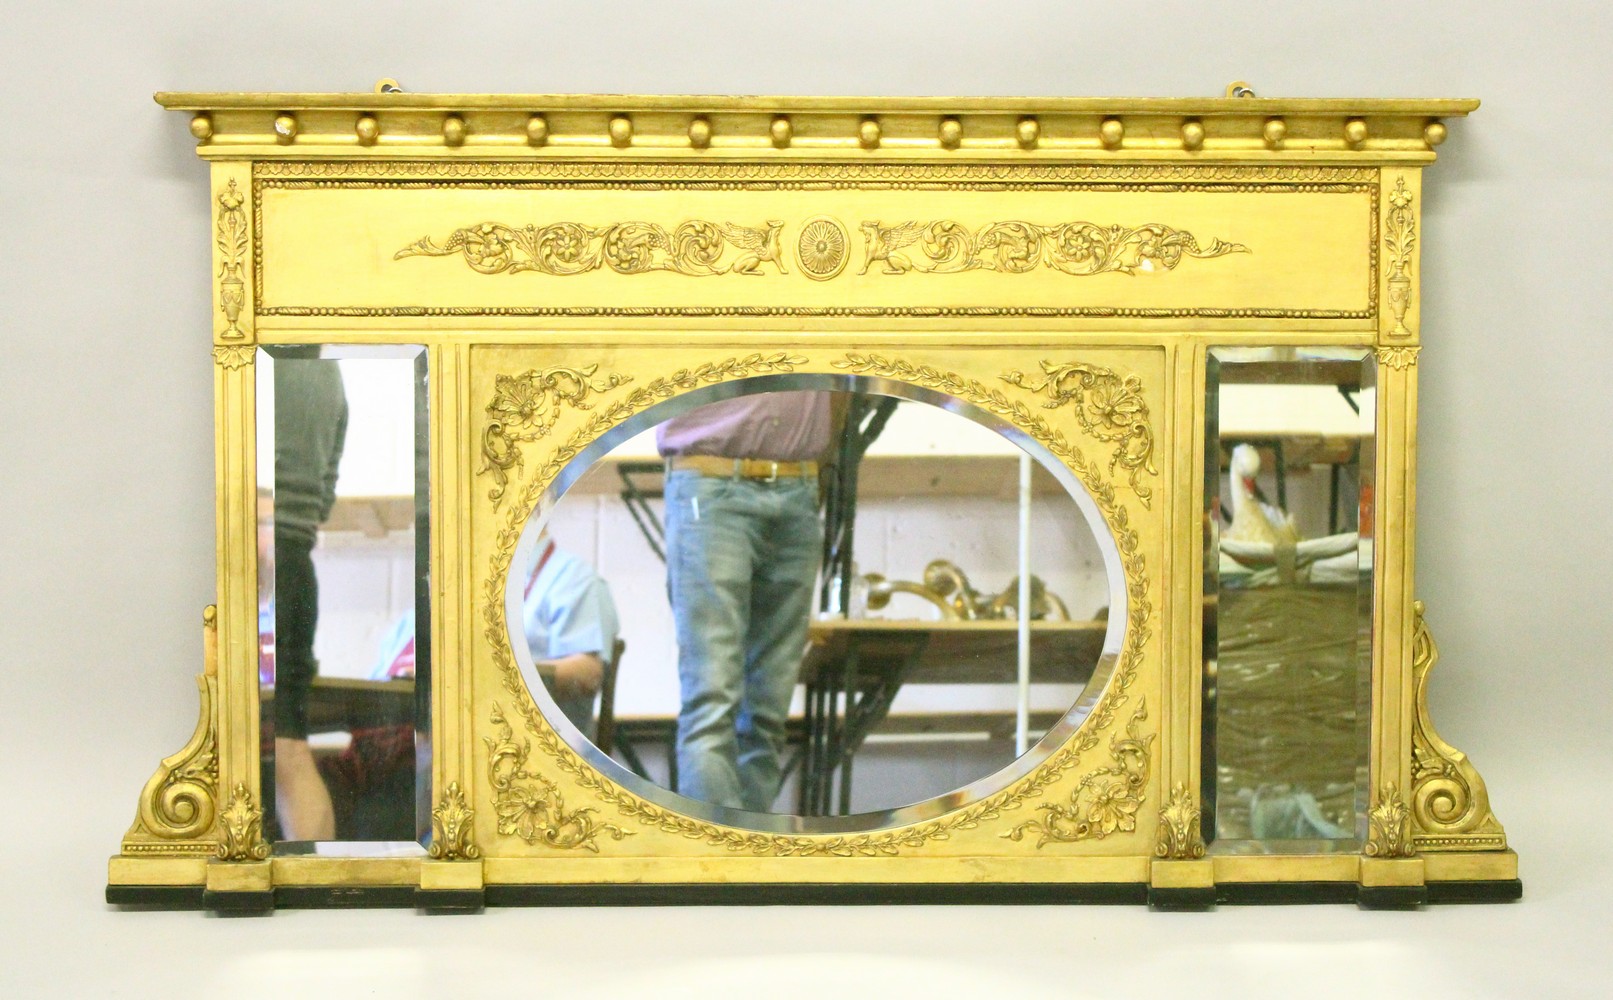 A VERY GOOD GILTWOOD OVERMANTLE MIRROR with oval mirrored panels and rectangular mirror in an ornate - Image 2 of 6